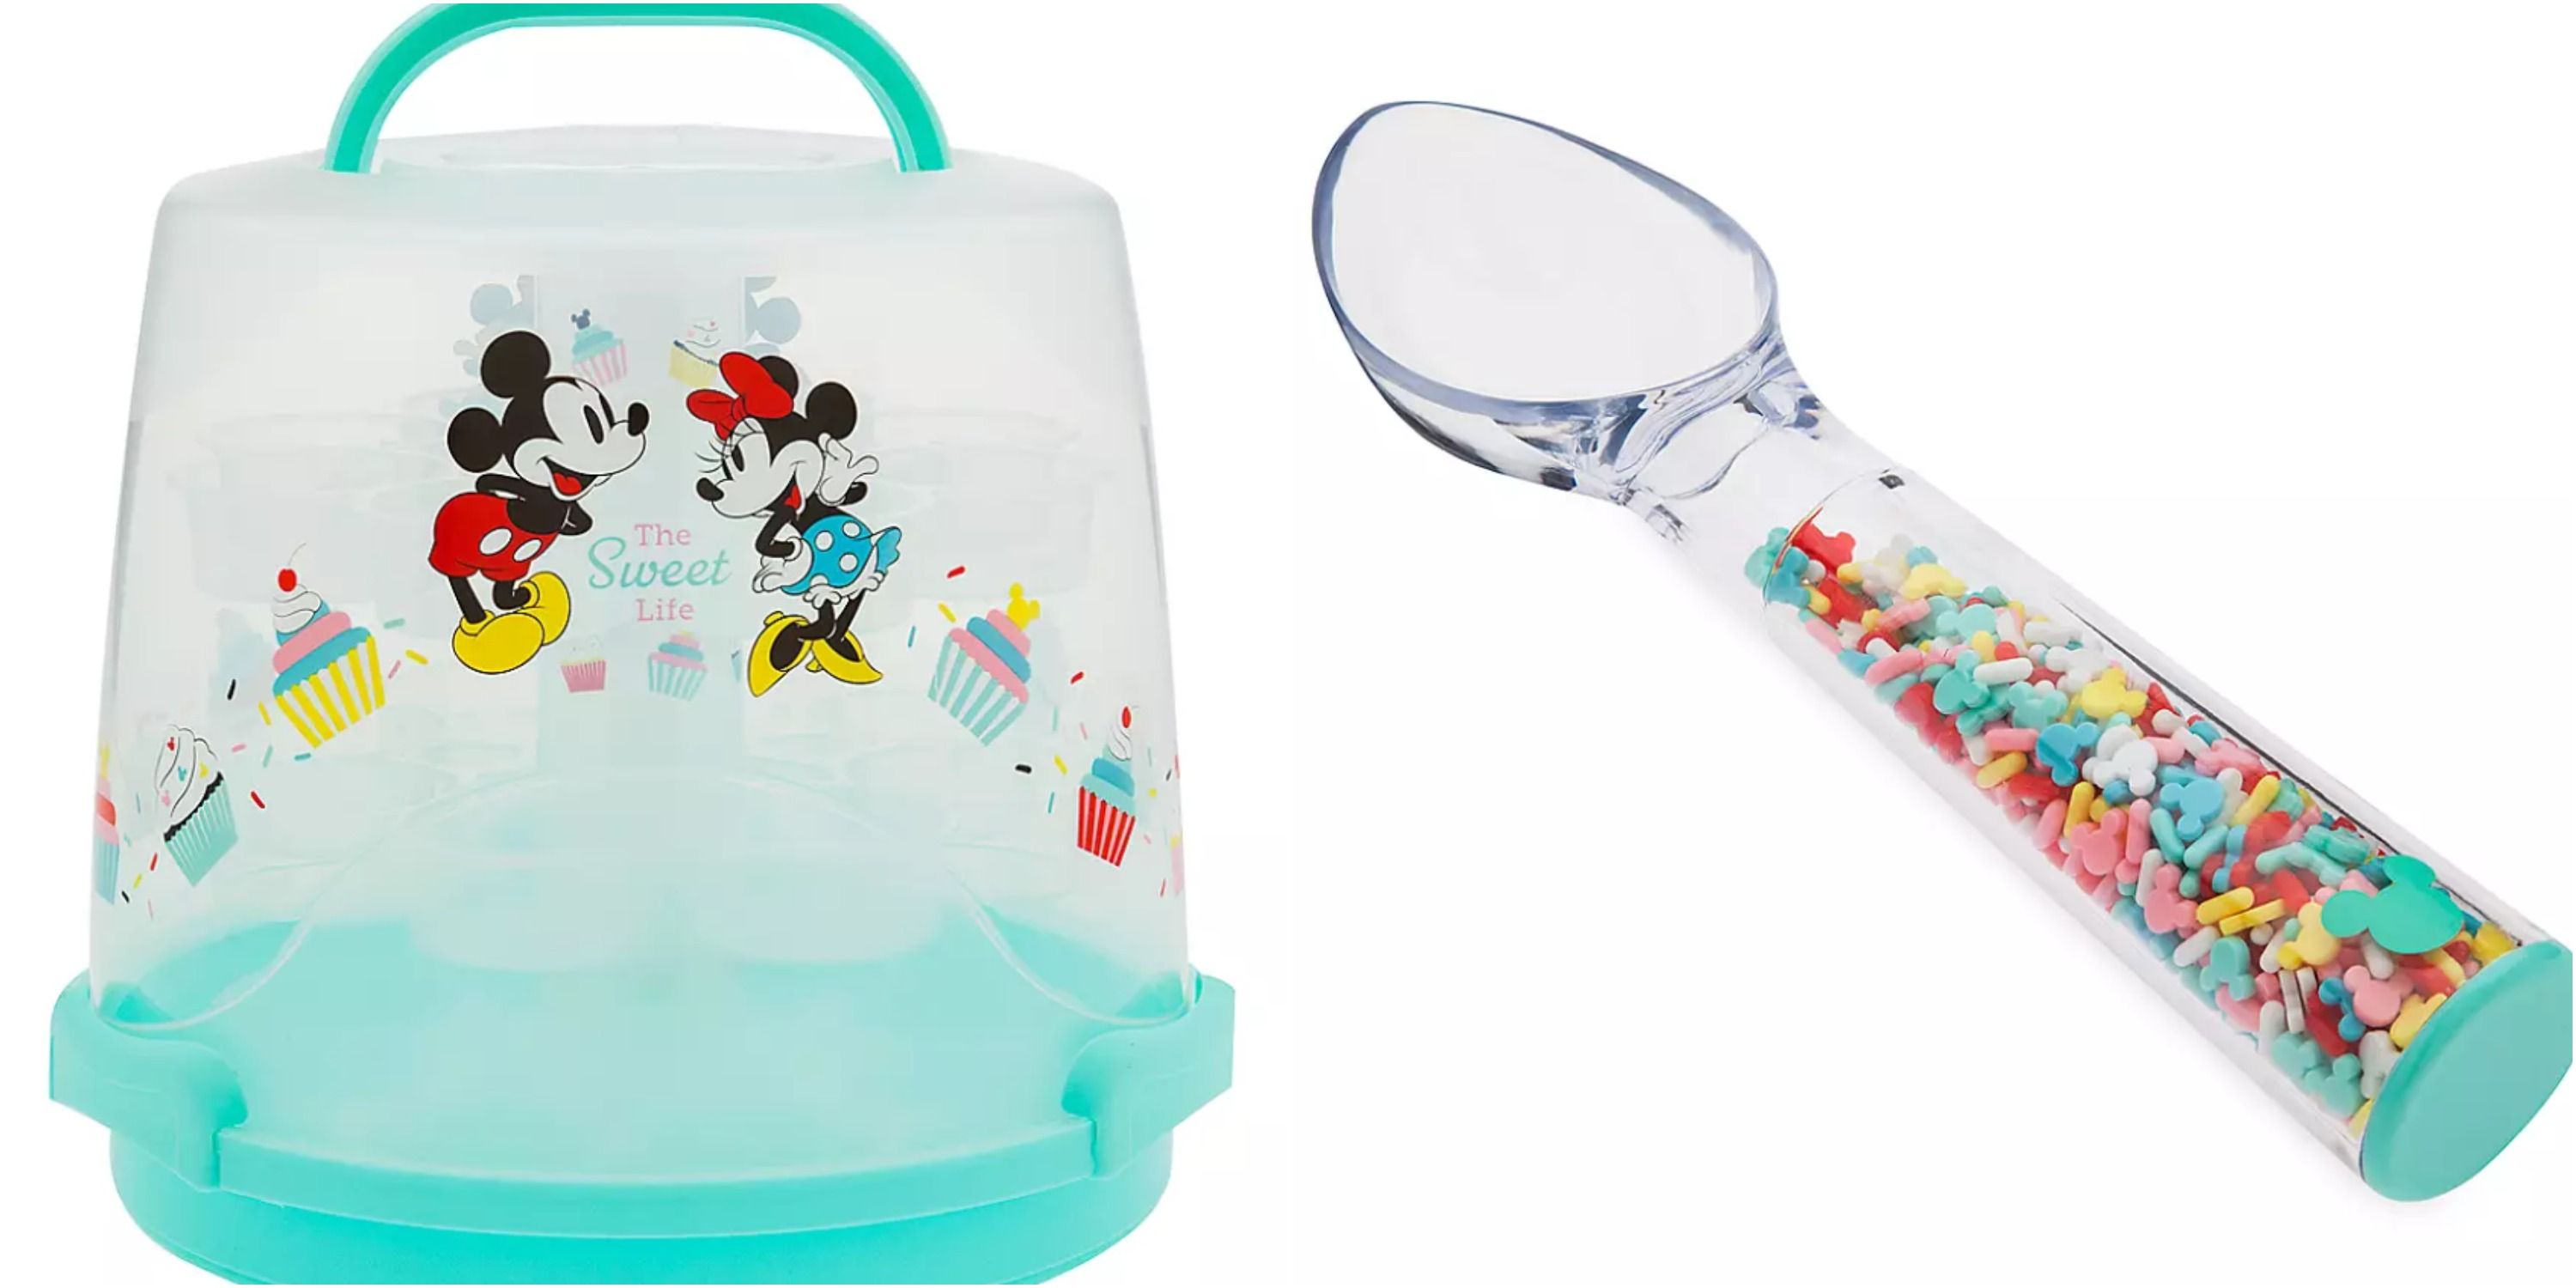 Disney 3 Mickey's Espresso Cup with Spoon - Disney Gifts